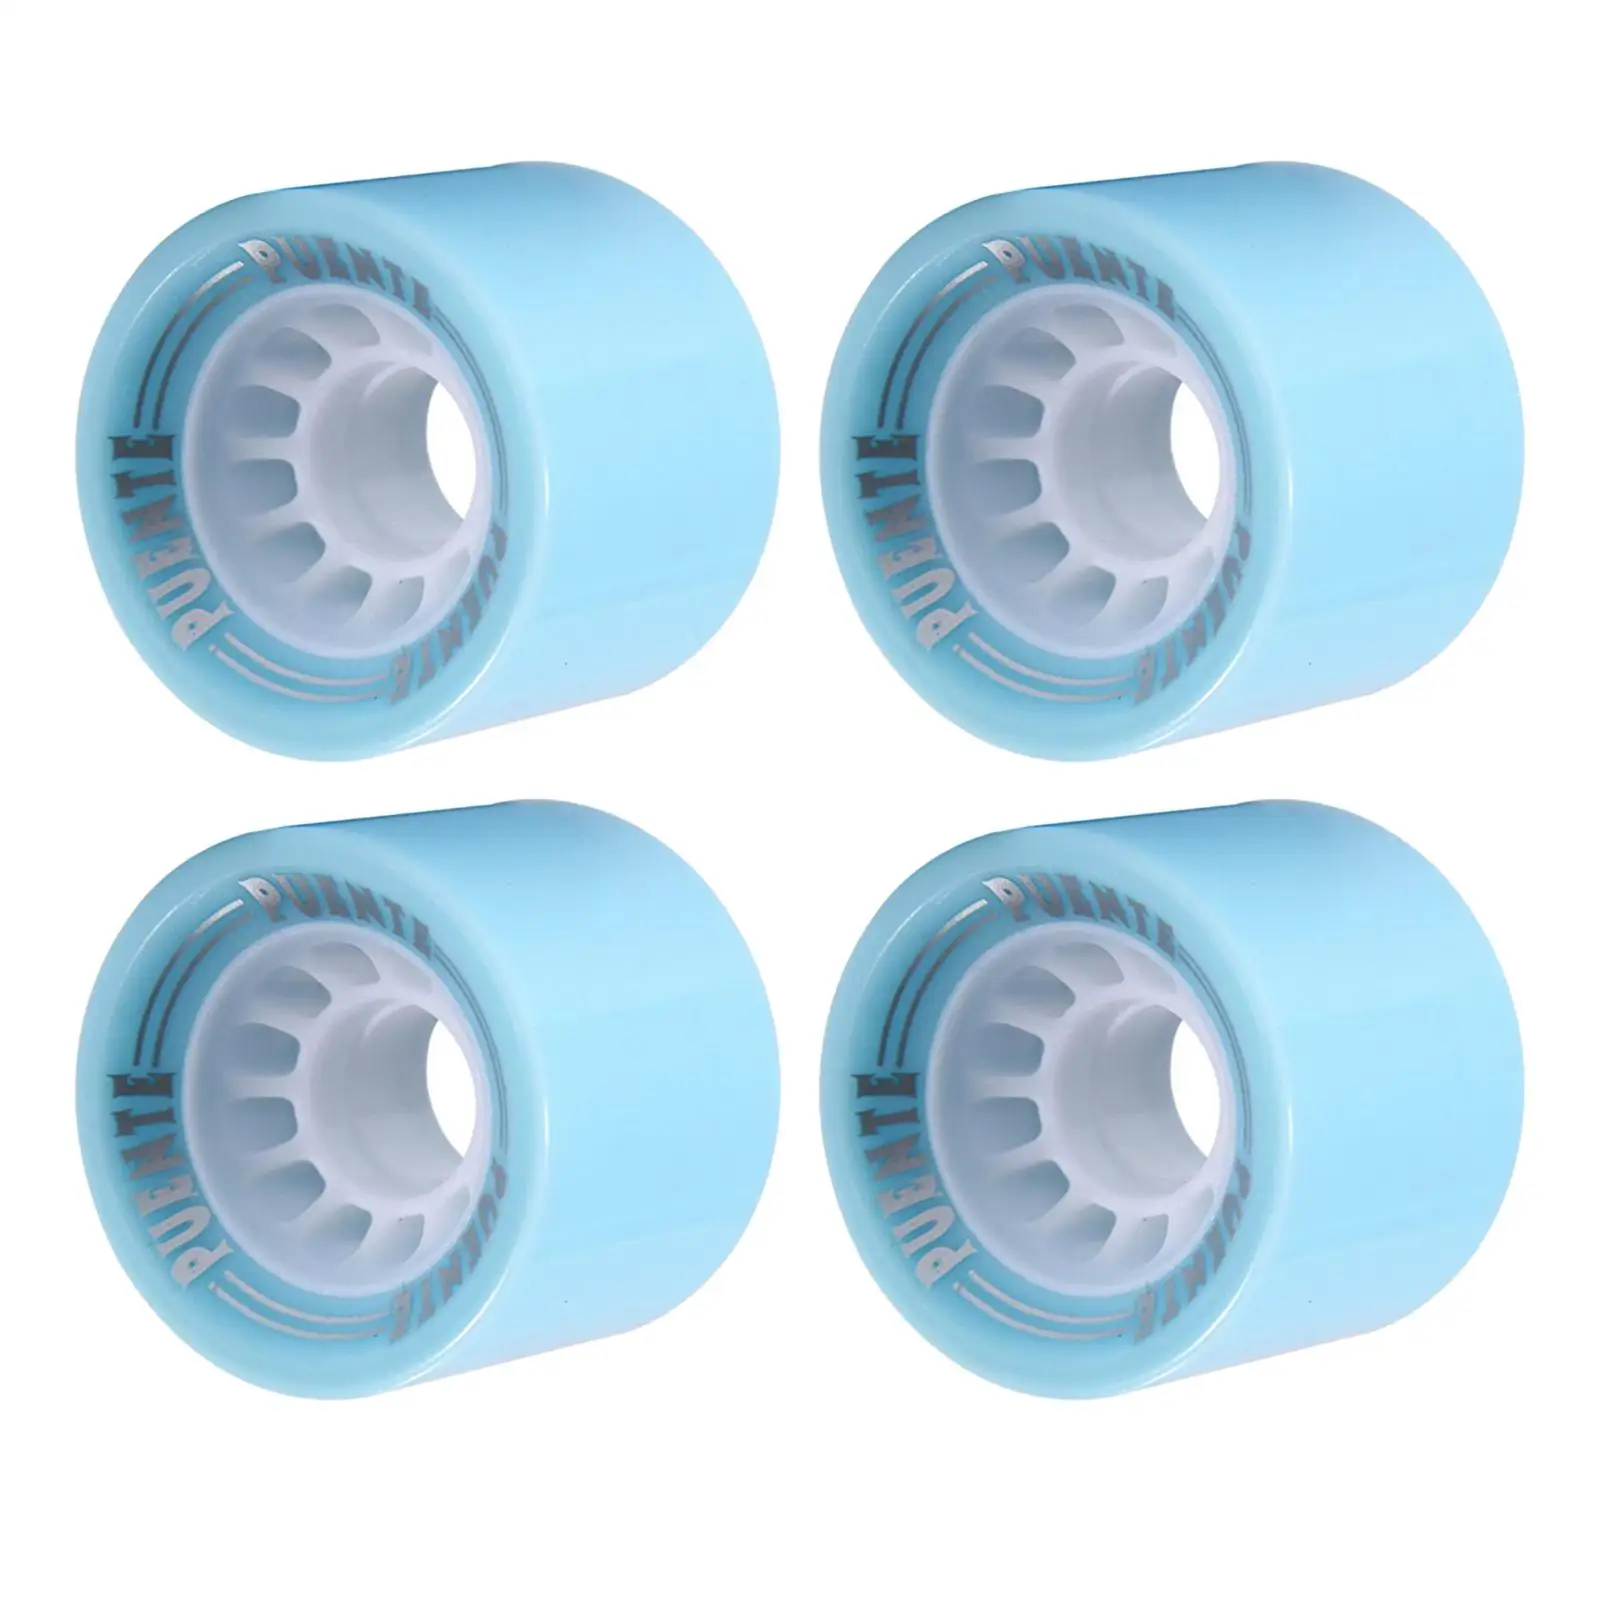 4 Pieces Longboard Skateboard Wheels 70x51mm Hardness  Cruising Wheel Bearings and Spacers Set   Board Replacements